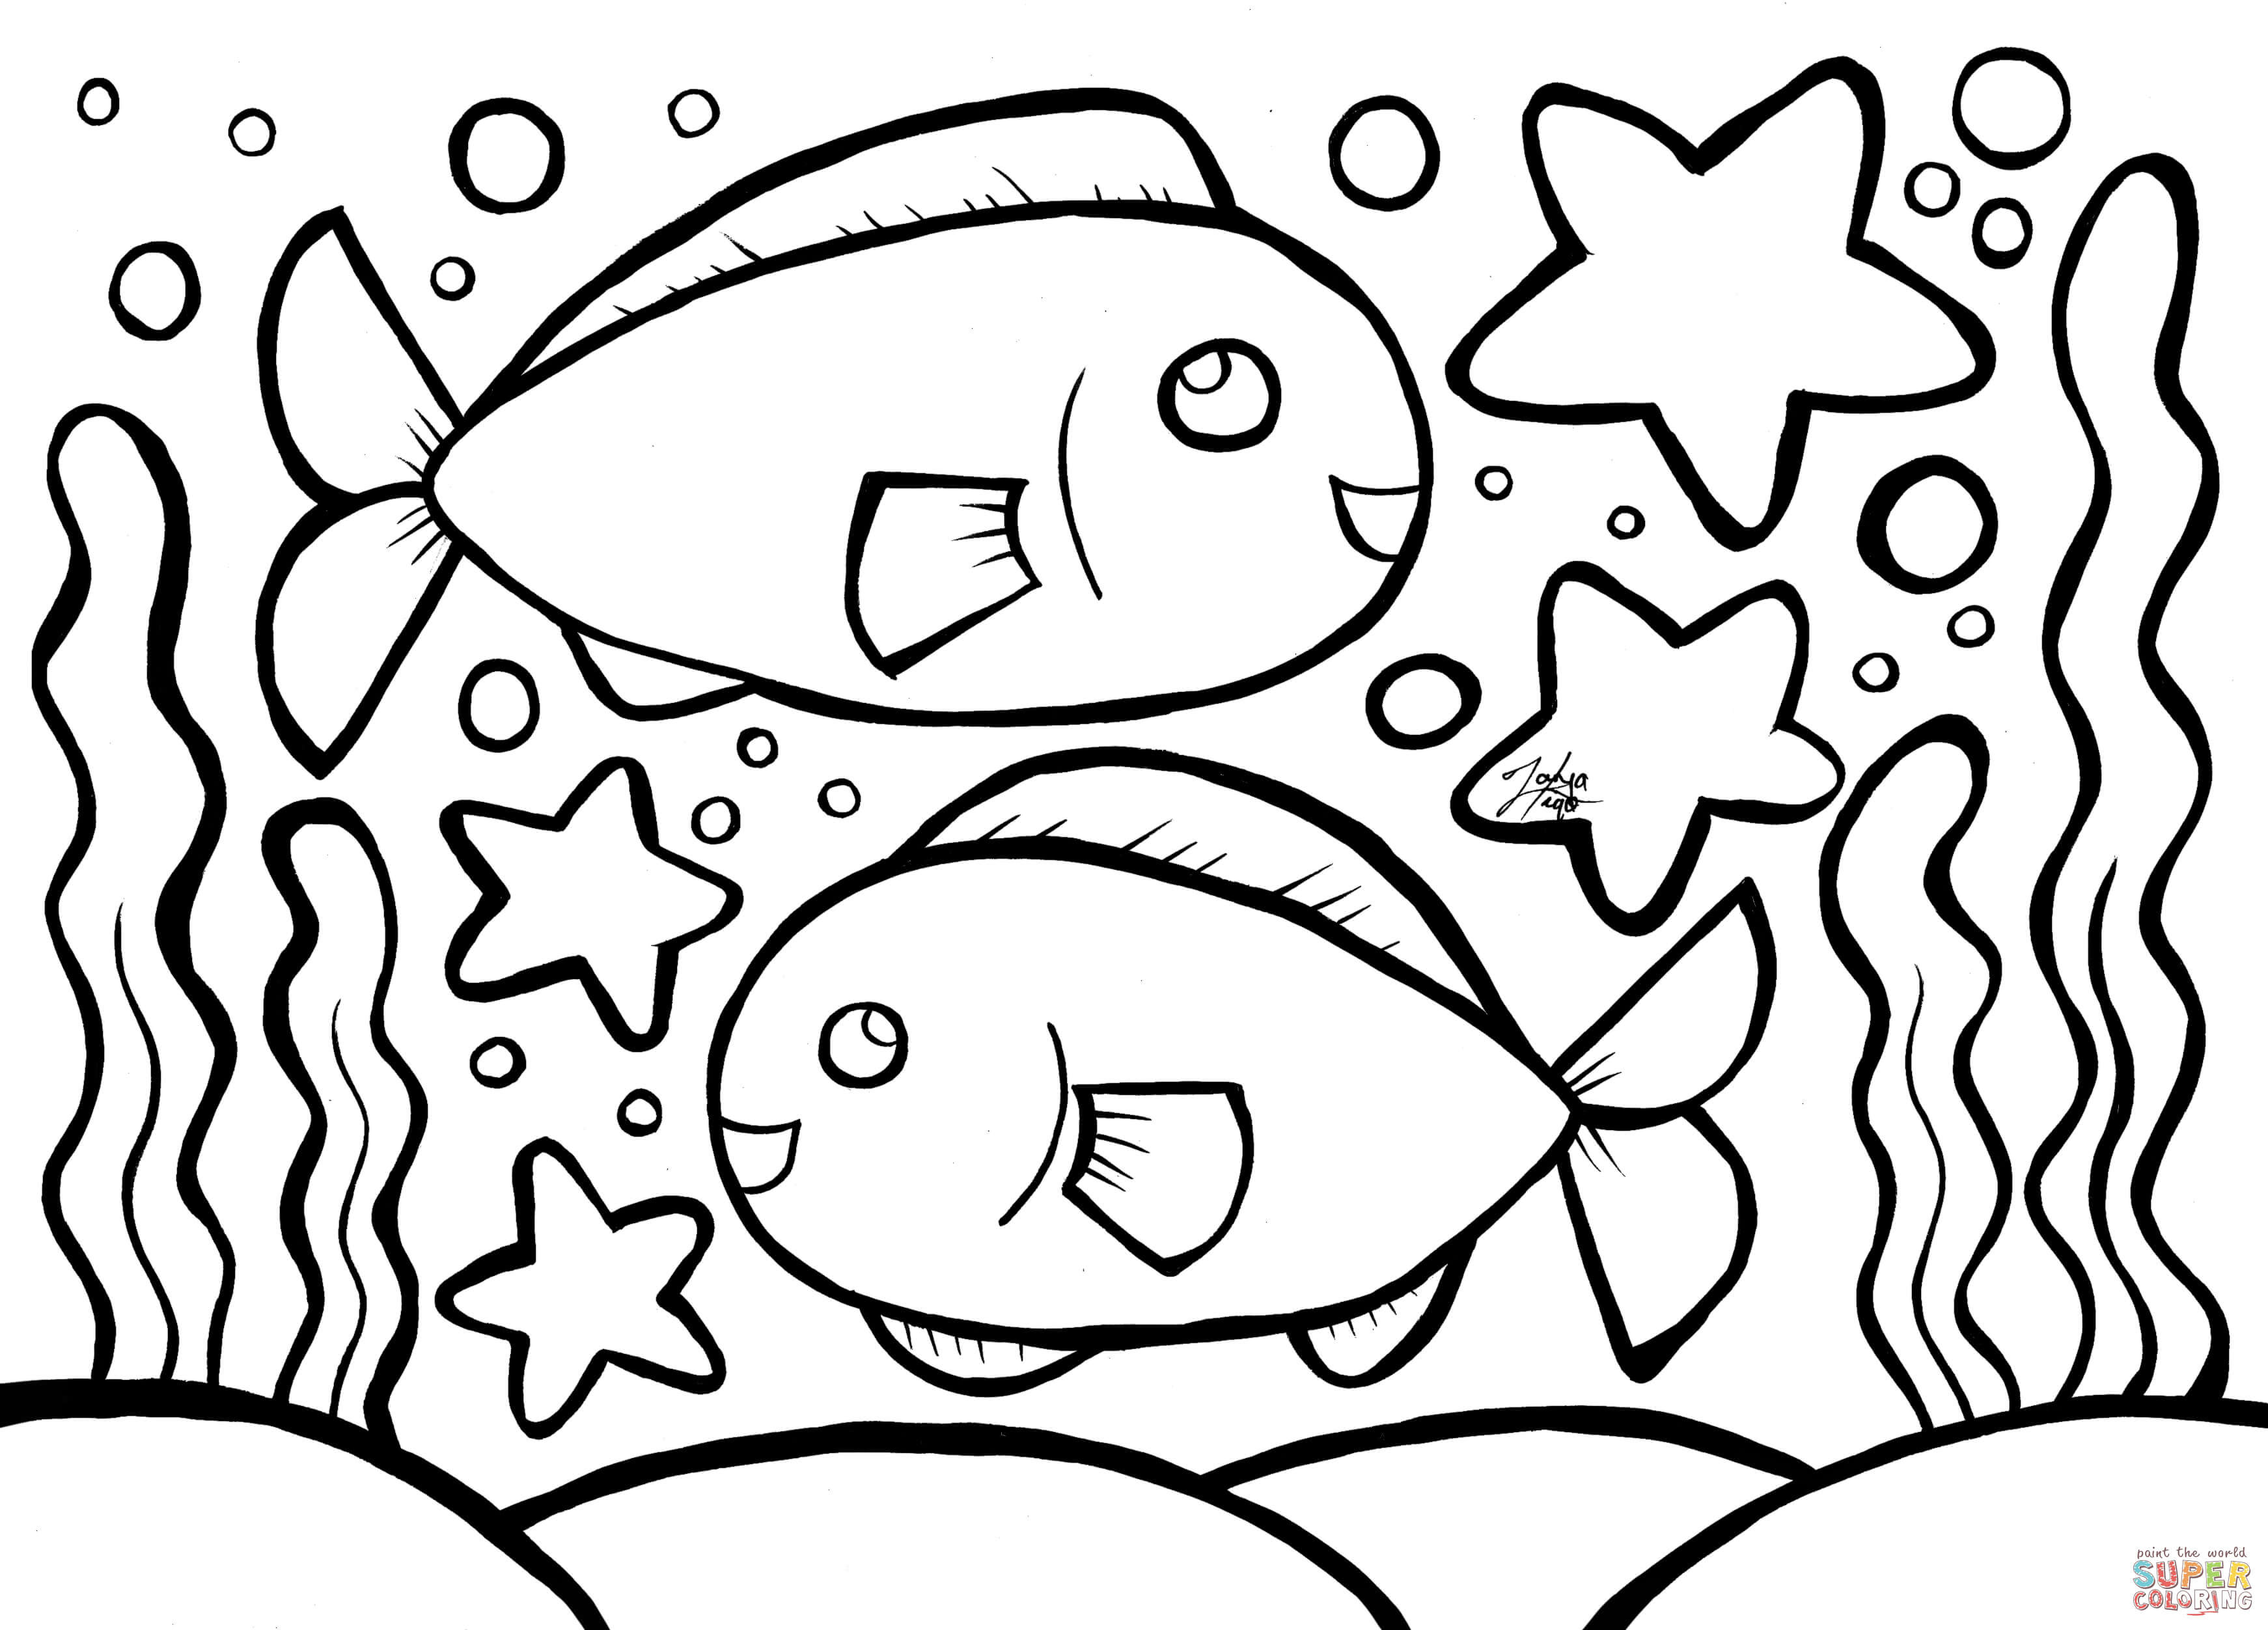 Little Fish Coloring Page / Fish Coloring Pages 100 Pictures Free